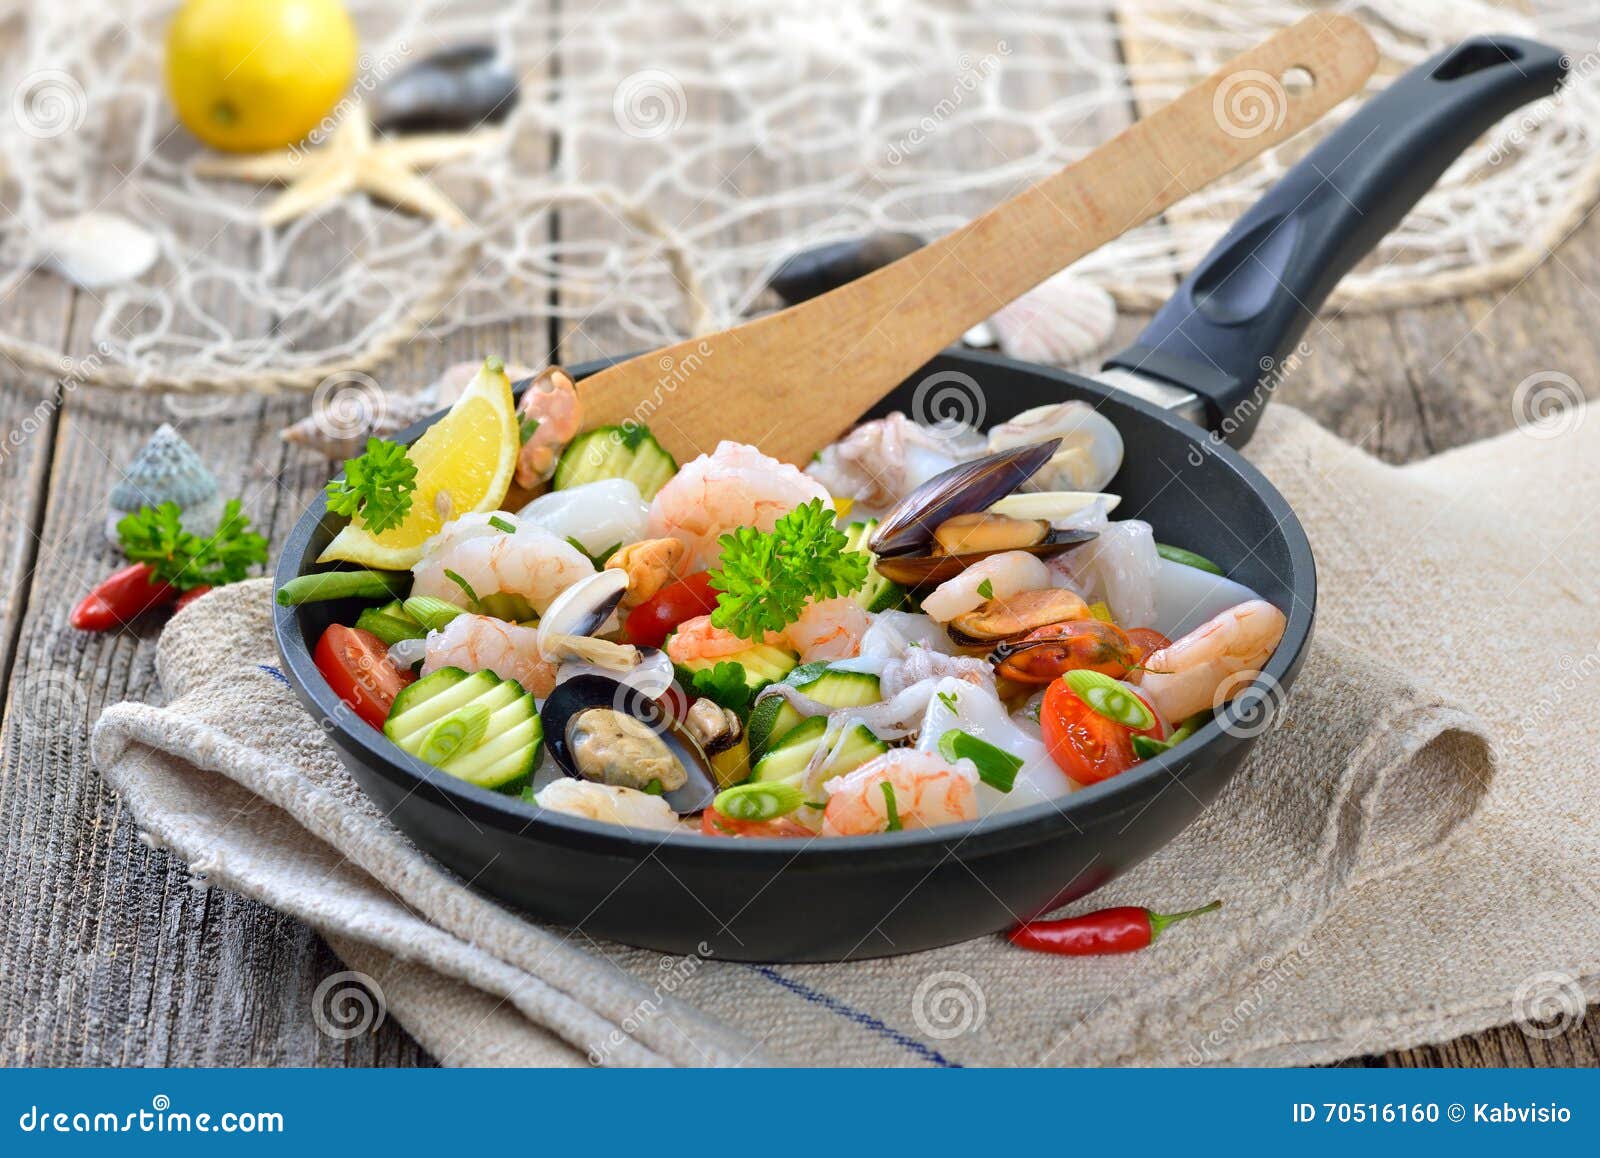 Fish pan stock photo. Image of mussel, healthy, king